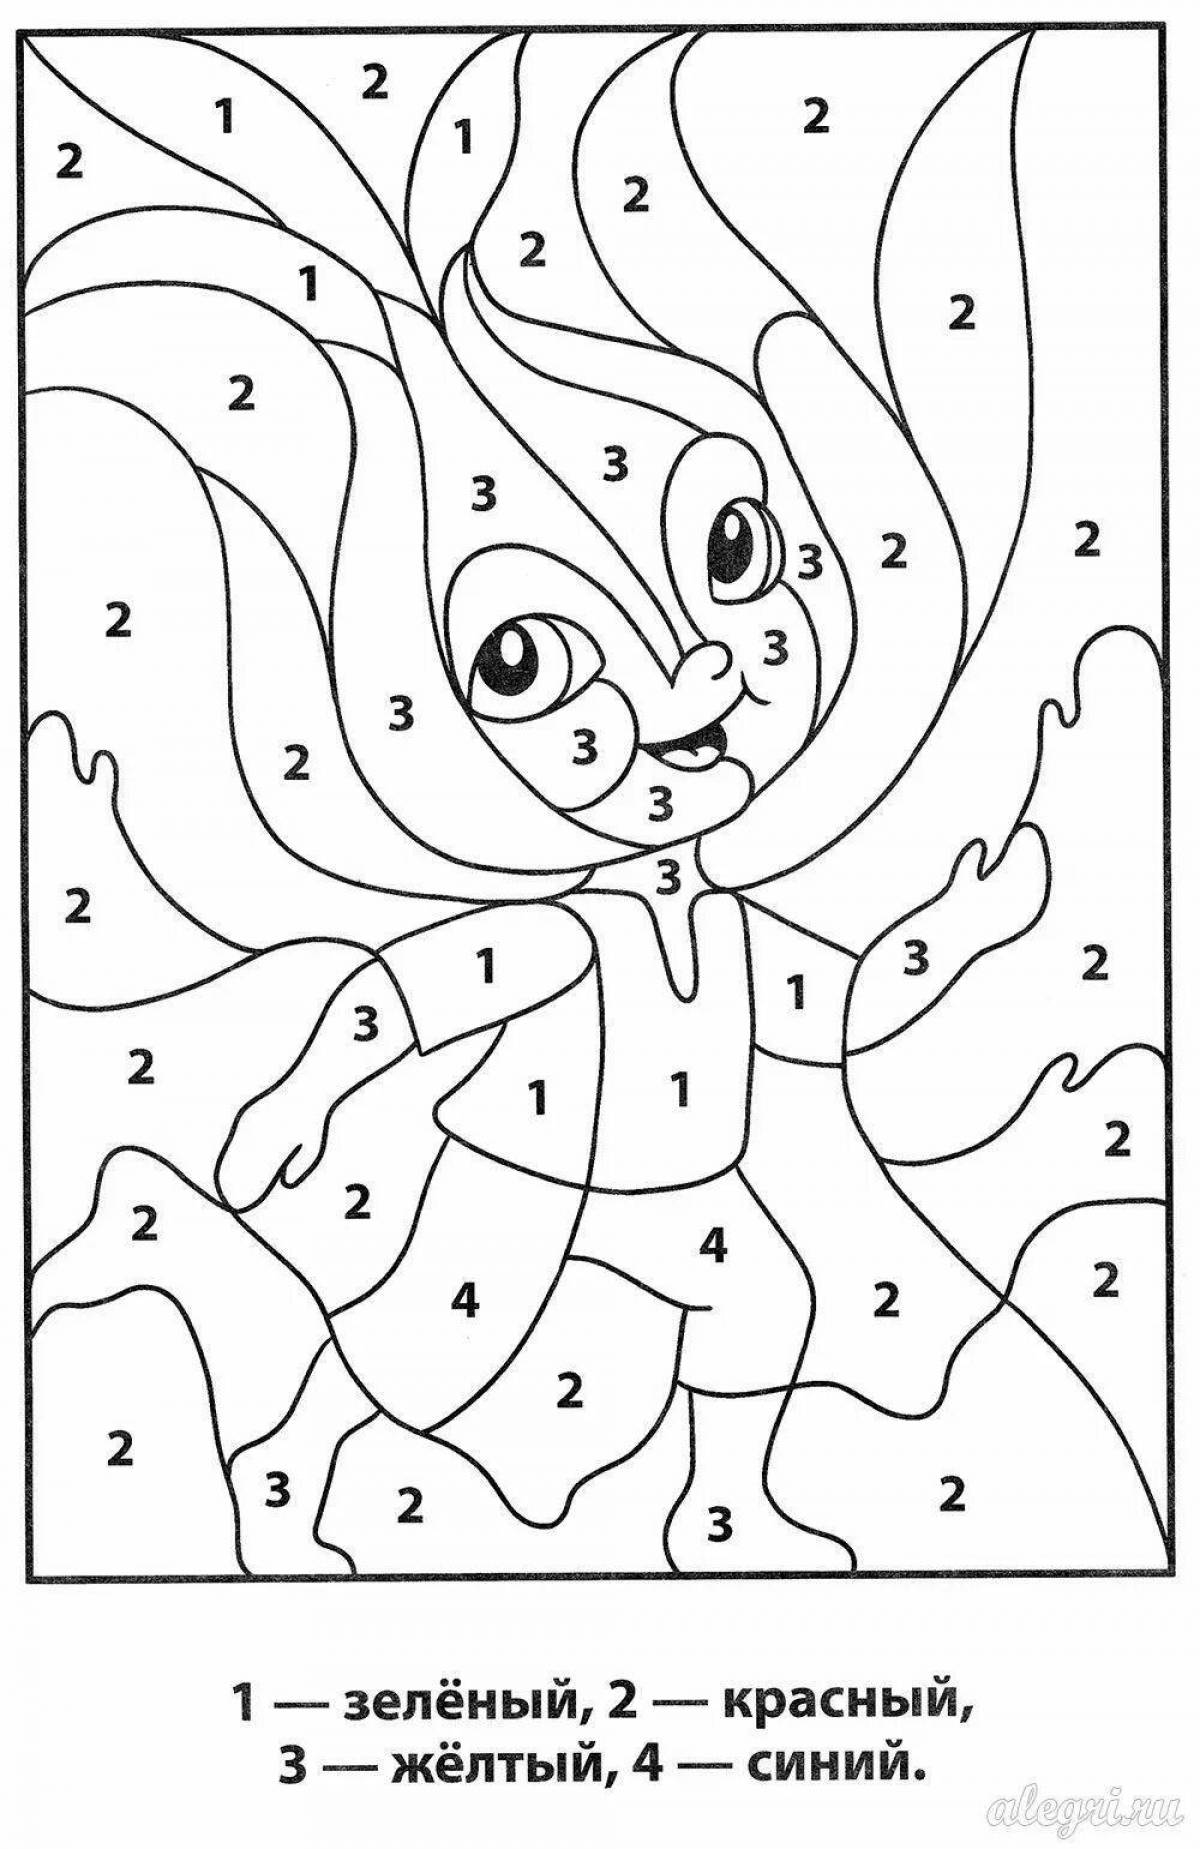 Bright coloring by numbers for children 5-7 years old